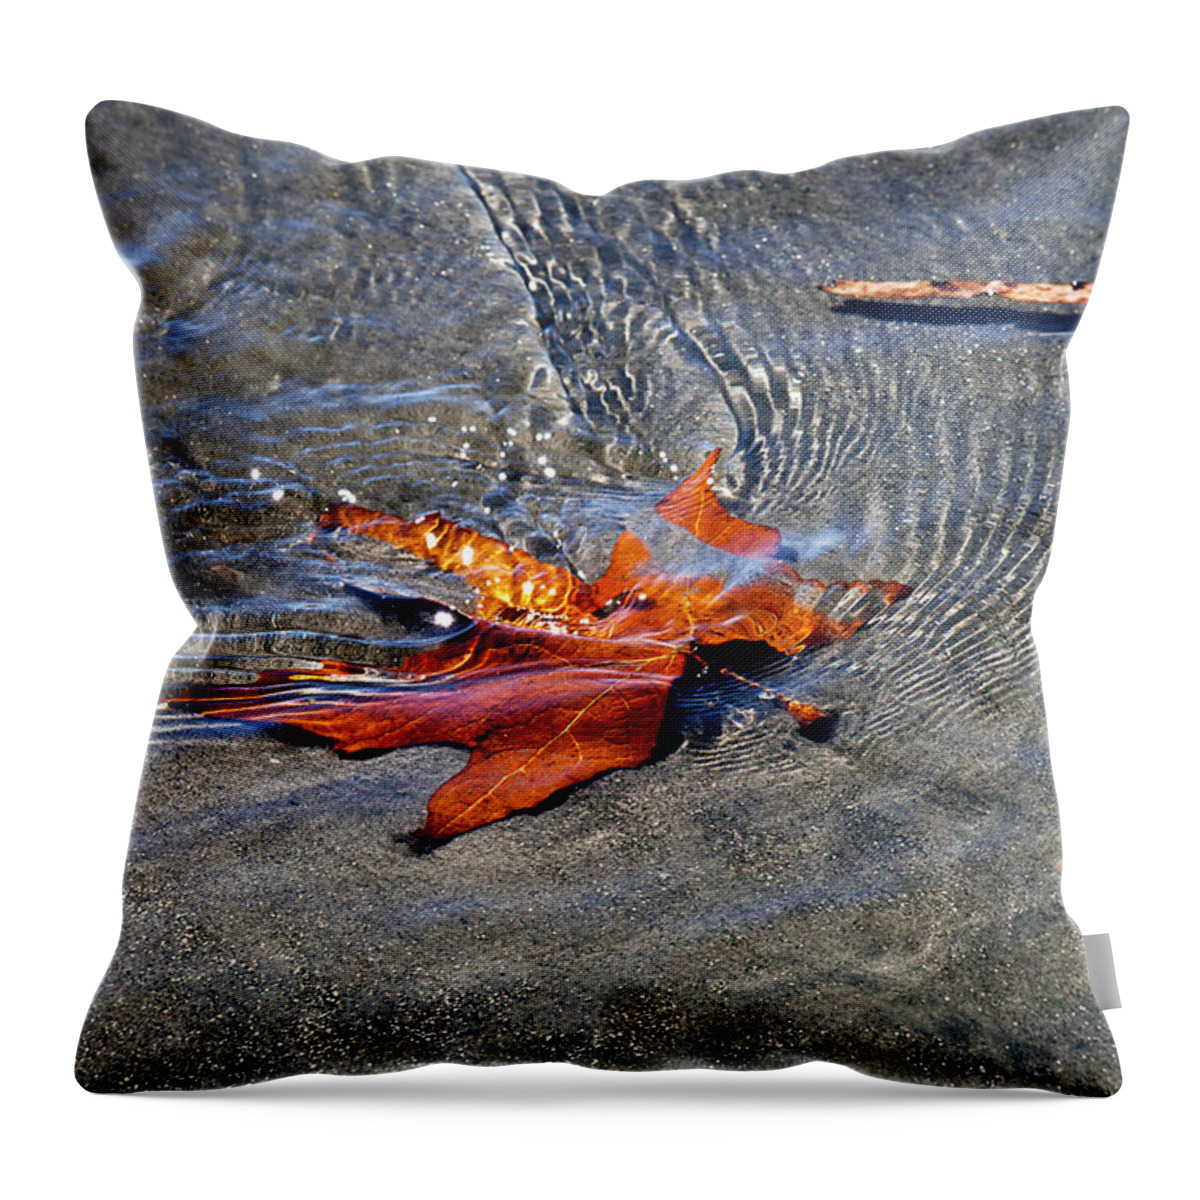 Leaf Throw Pillow featuring the photograph Rippling Amber by Joe Schofield